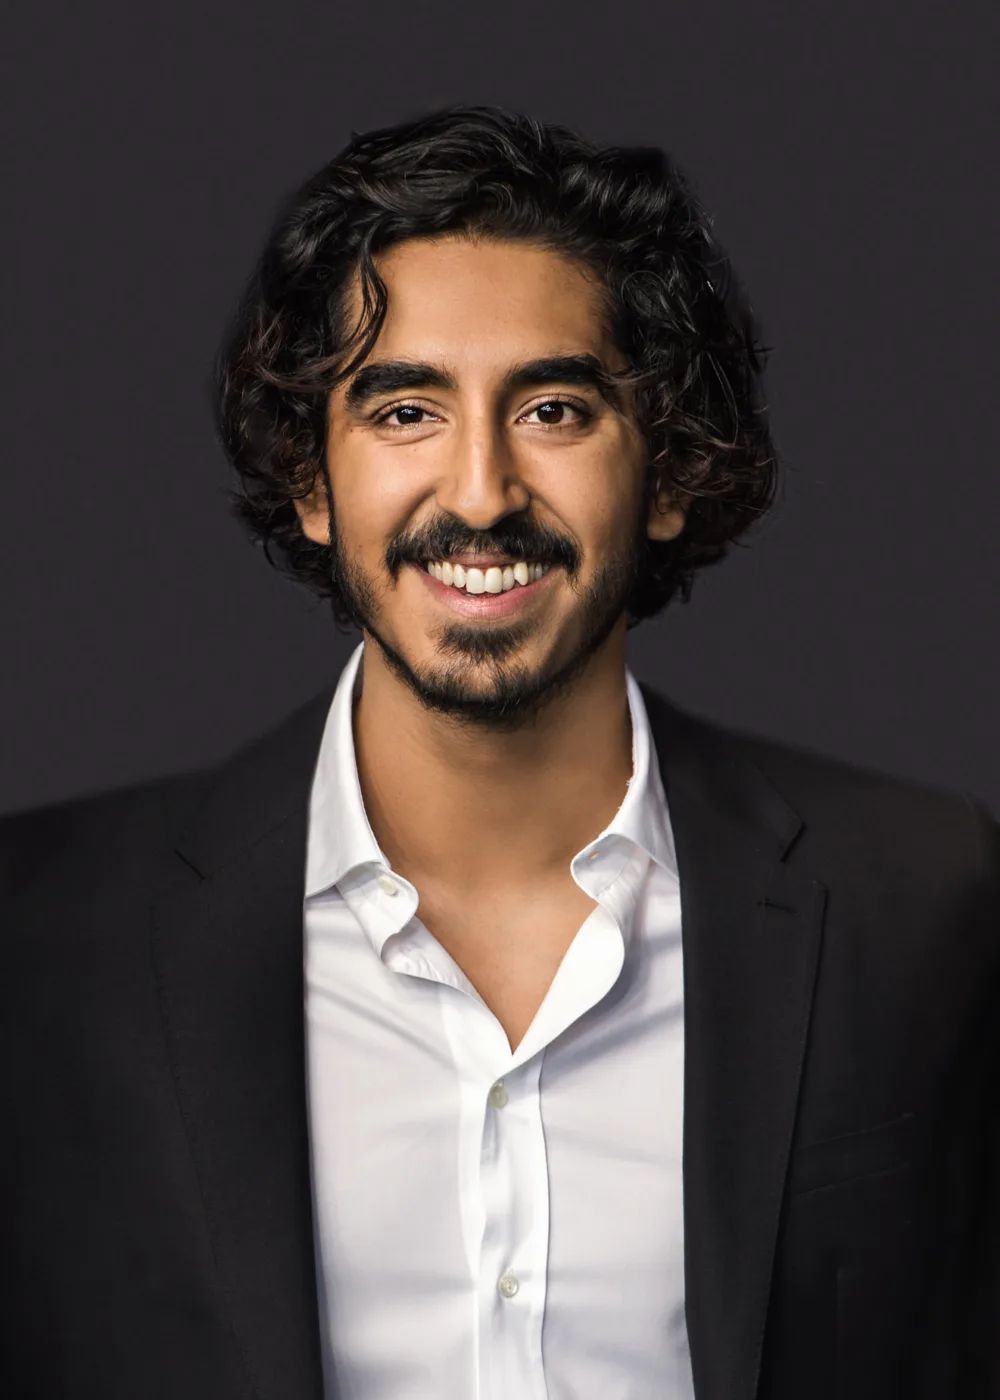 Dev Patel is a British actor known for his dynamic performances on screen and his dedication to his craft. Born on April 23, 1990, in London, England, Patel began his acting career in his late teens, appearing in the popular British television series Skins before making his feature film debut in Slumdog Millionaire. Patel is known for his ability to convey deep emotions and inhabit a wide range of characters, from sympathetic to complex and challenging. He has received widespread critical acclaim for his work in films like Lion, The Personal History of David Copperfield, and The Green Knight, and has been nominated for numerous awards, including an Academy Award and a Golden Globe. In addition to his acting career, Patel is also a philanthropist, supporting various charitable organizations and causes, including the Teenage Cancer Trust and the Dalit Children Foundation. With his impressive talent, dedication, and generosity, Patel has become one of the most respected and admired actors of his generation, known for his ability to captivate audiences with his powerful and nuanced performances.